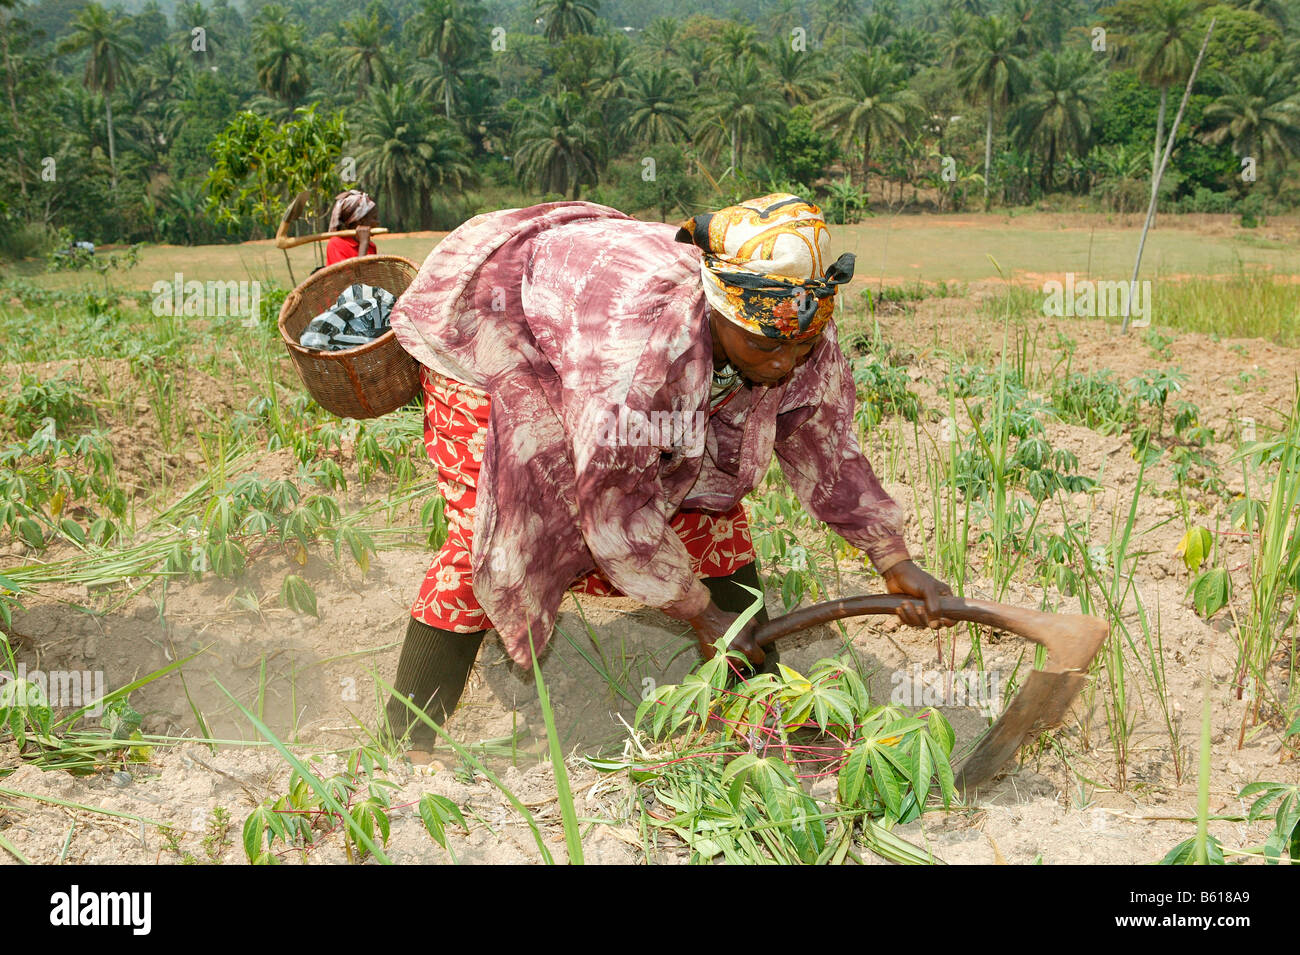 Woman working in a field, Njindom, Cameroon, Africa Stock Photo